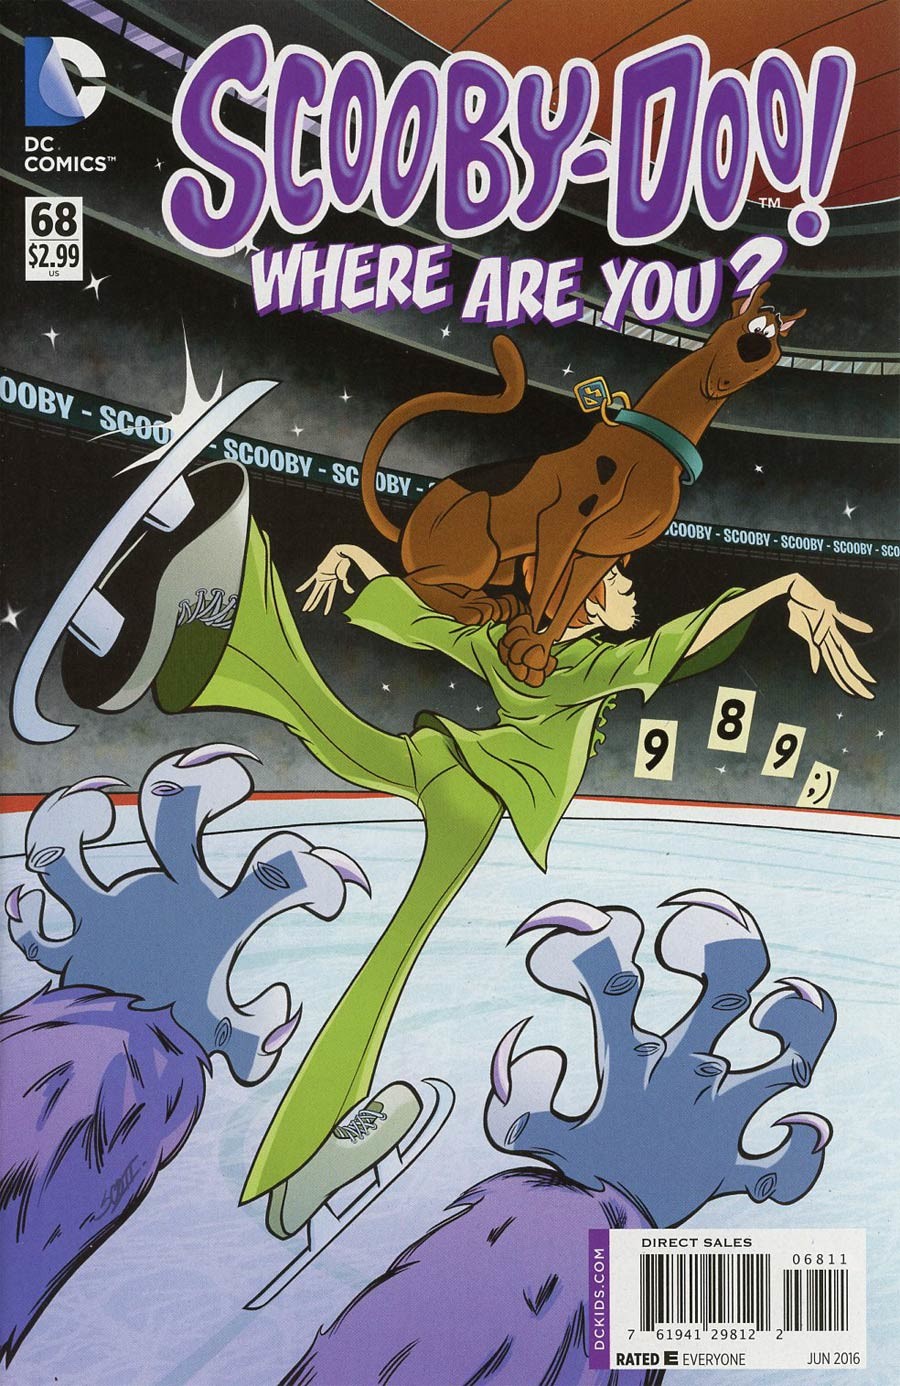 Scooby-Doo: Where Are You? Vol. 1 #68